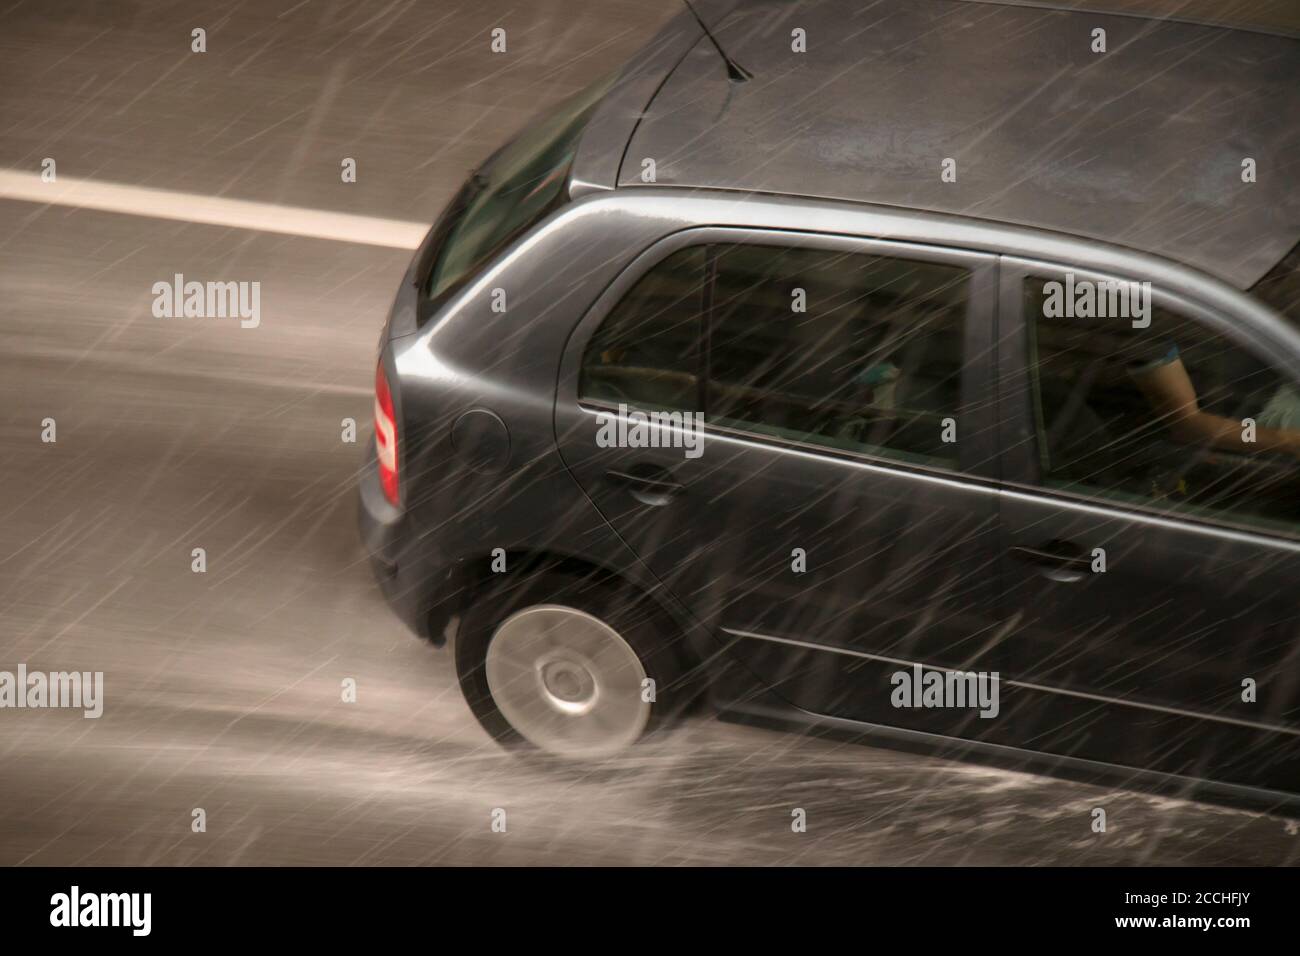 Blurry driving car on the street hit by the heavy rain with hail, on a rainy day in motion blur panning shot from above Stock Photo